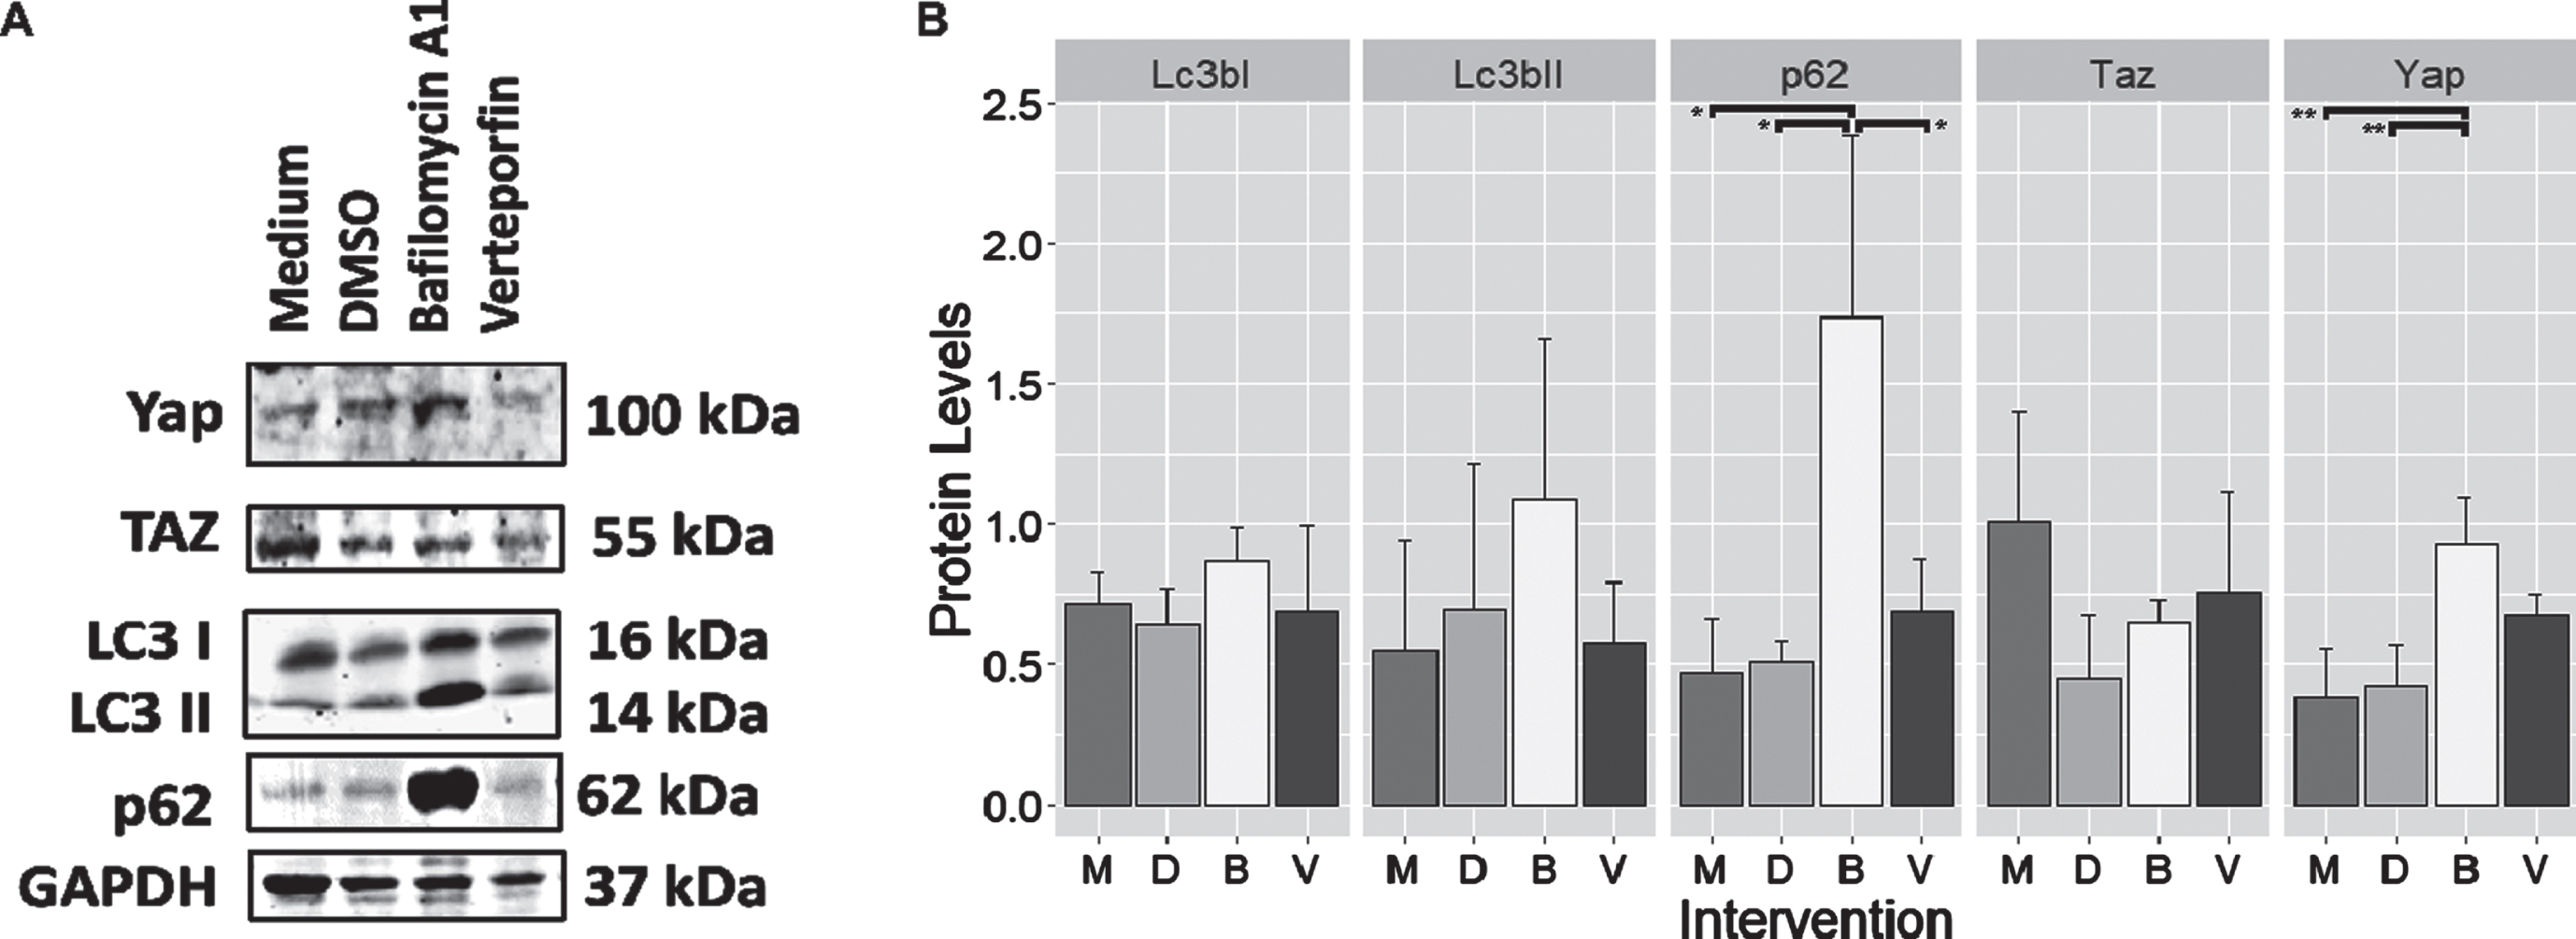 Protein expression levels from C2C12 cells treated with Bafilomycin A1 and Verteporfin. (A) Representative blot of Yap/Taz and proteins involved in autophagy. Note the very marked increase in p62 and Yap intensity after treatment using Bafilomycin A1. (B) Bar plot showing the relative expression levels of proteins from blot A. After treatment with Bafilomycin A1, the p62 protein significantly increased compared to medium, DMSO, and Verteporfin (post hoc analysis –Tukey HSD, p < 0.05 for all three pairs). In addition, the administration of Bafilomycin A1 also significantly increased Yap levels compared to medium and DMSO (post hoc analysis –Tukey HSD, p < 0.01 for all two pairs). Other proteins did not reach a statistically significant difference. M: Medium; D: DMSO; B: Bafilomycin A1; V: Verteporfin. **: highly significant differences at the level of p < 0.01; *: significant difference compared at the level of p < 0.05.